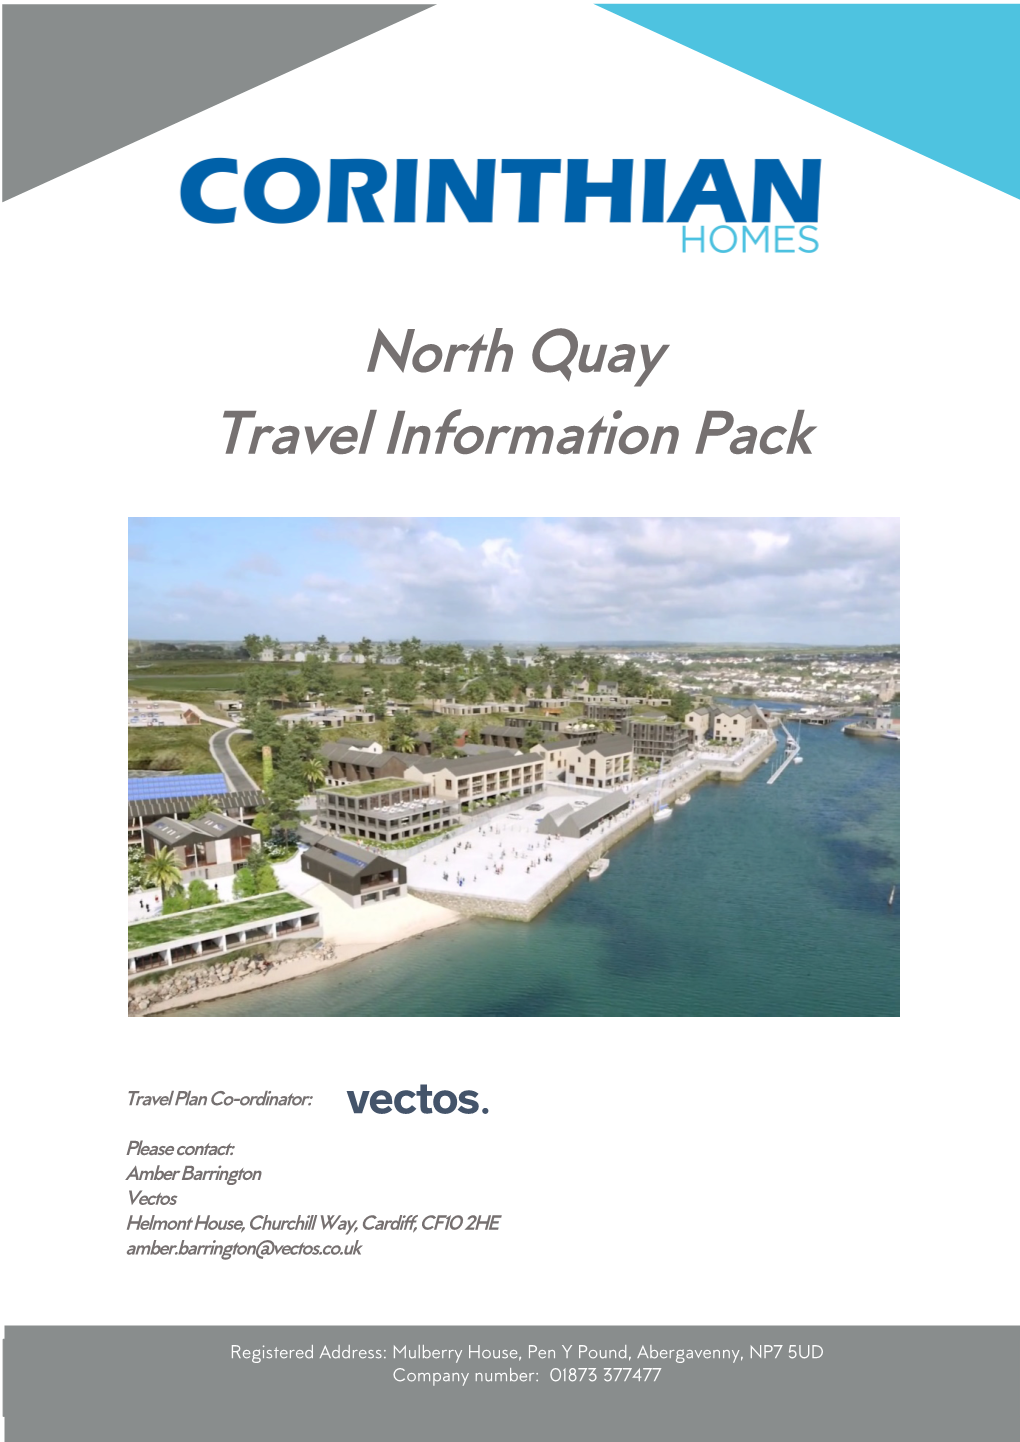 North Quay Travel Information Pack